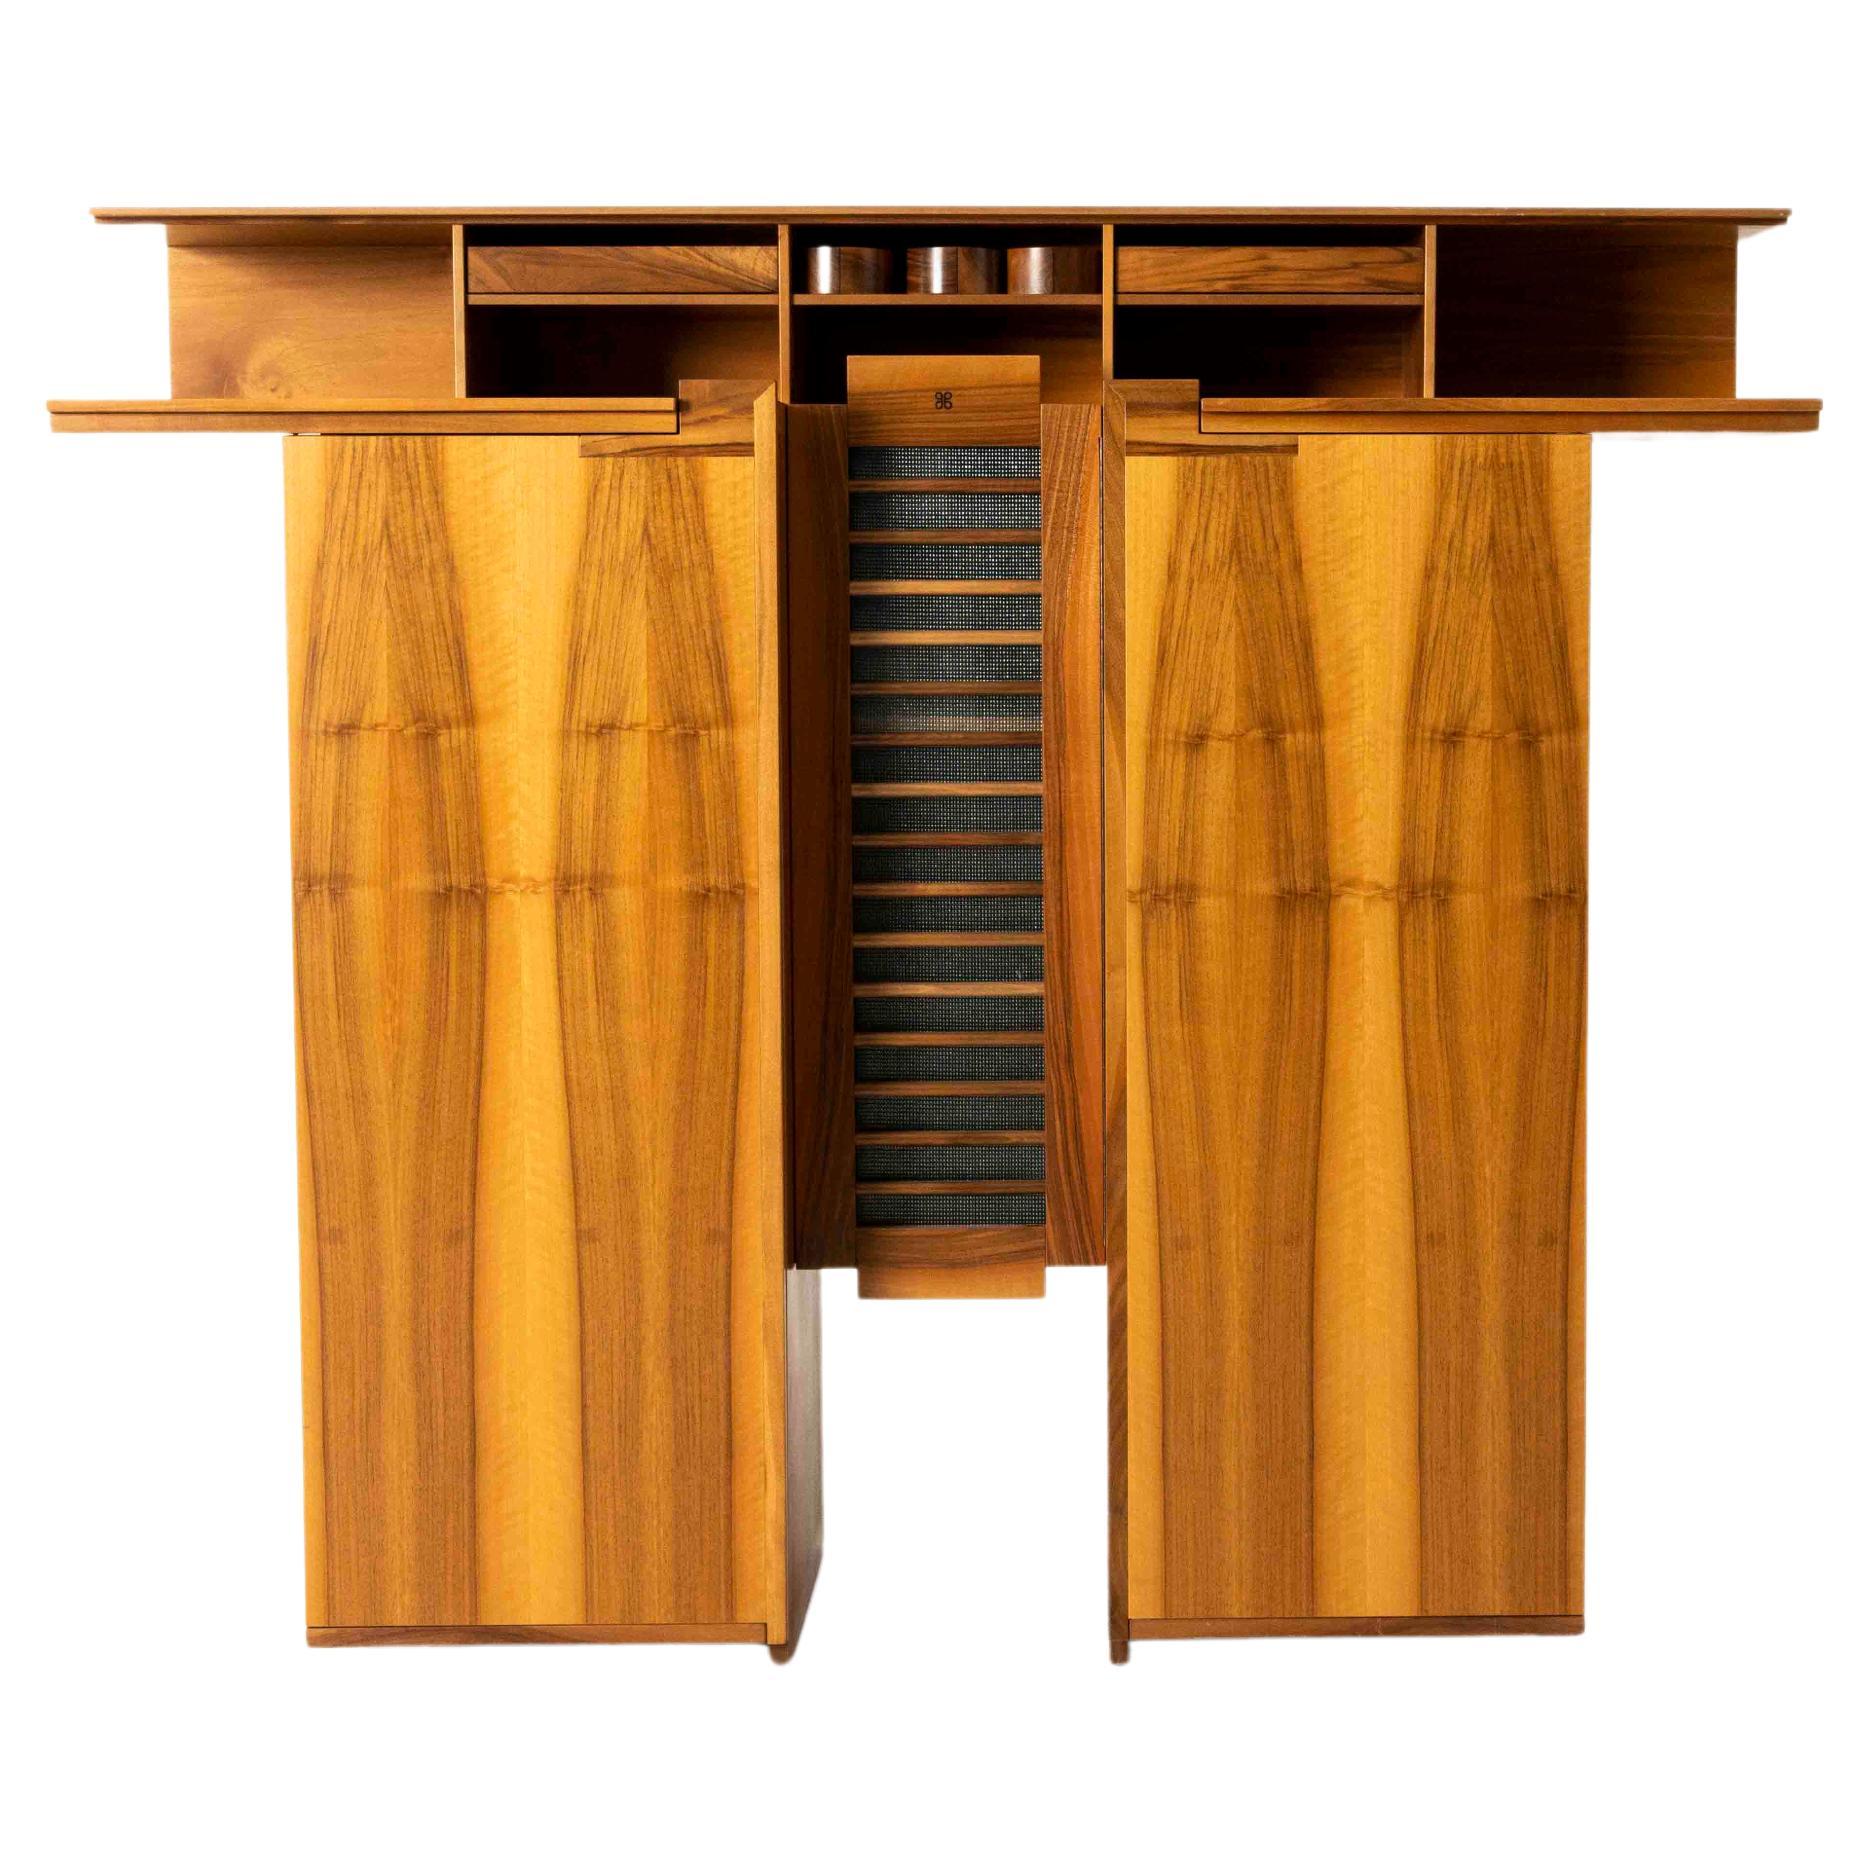 Sideboard by Franco Poli from the 'Scaligera' series for Bernini, Italy 1970s